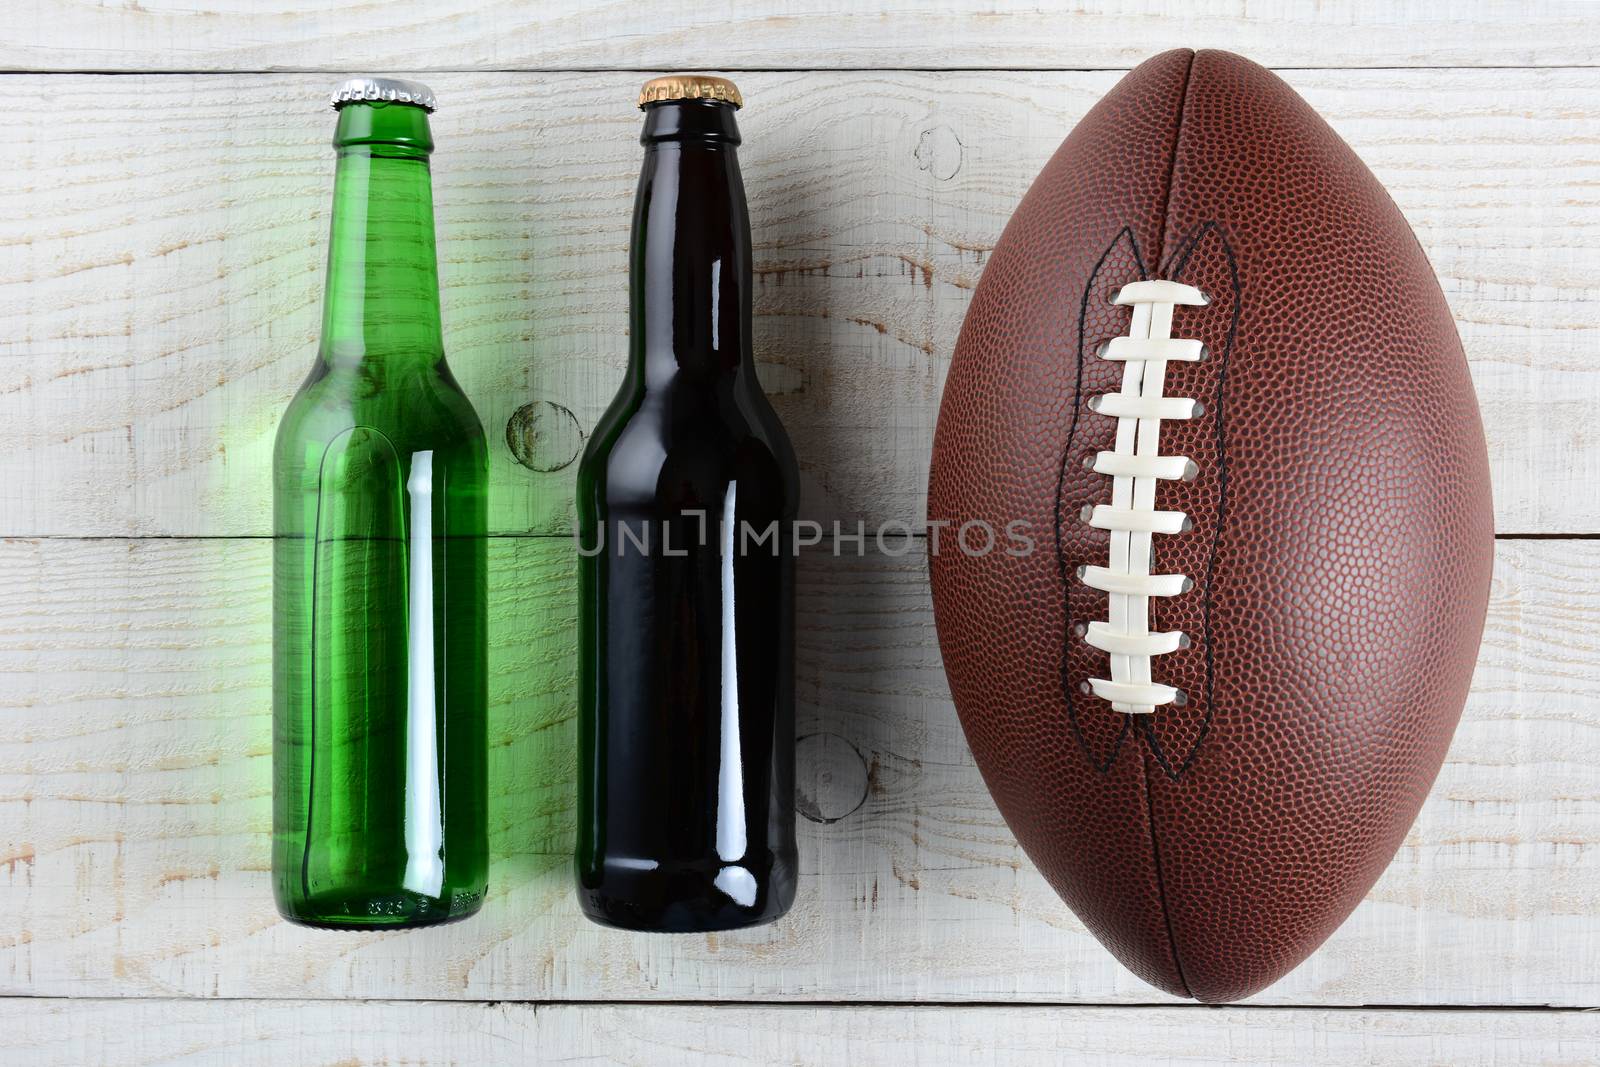 Two beer bottles and an American style football on a rustic whitewashed wood surface. Horizontal format. One green bottle and one brown, both without labels.